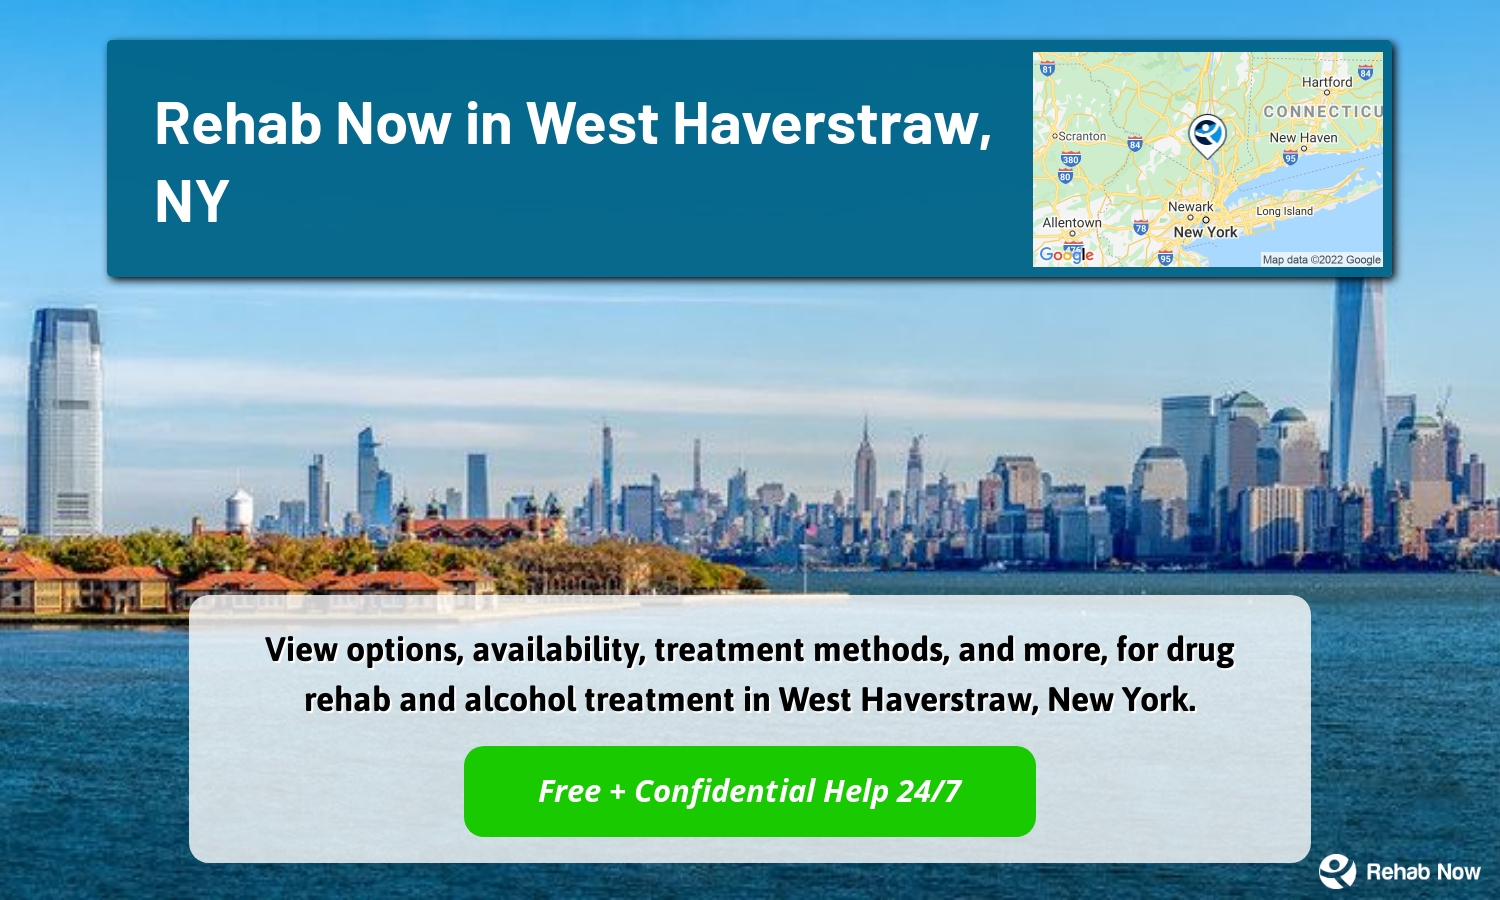 View options, availability, treatment methods, and more, for drug rehab and alcohol treatment in West Haverstraw, New York.